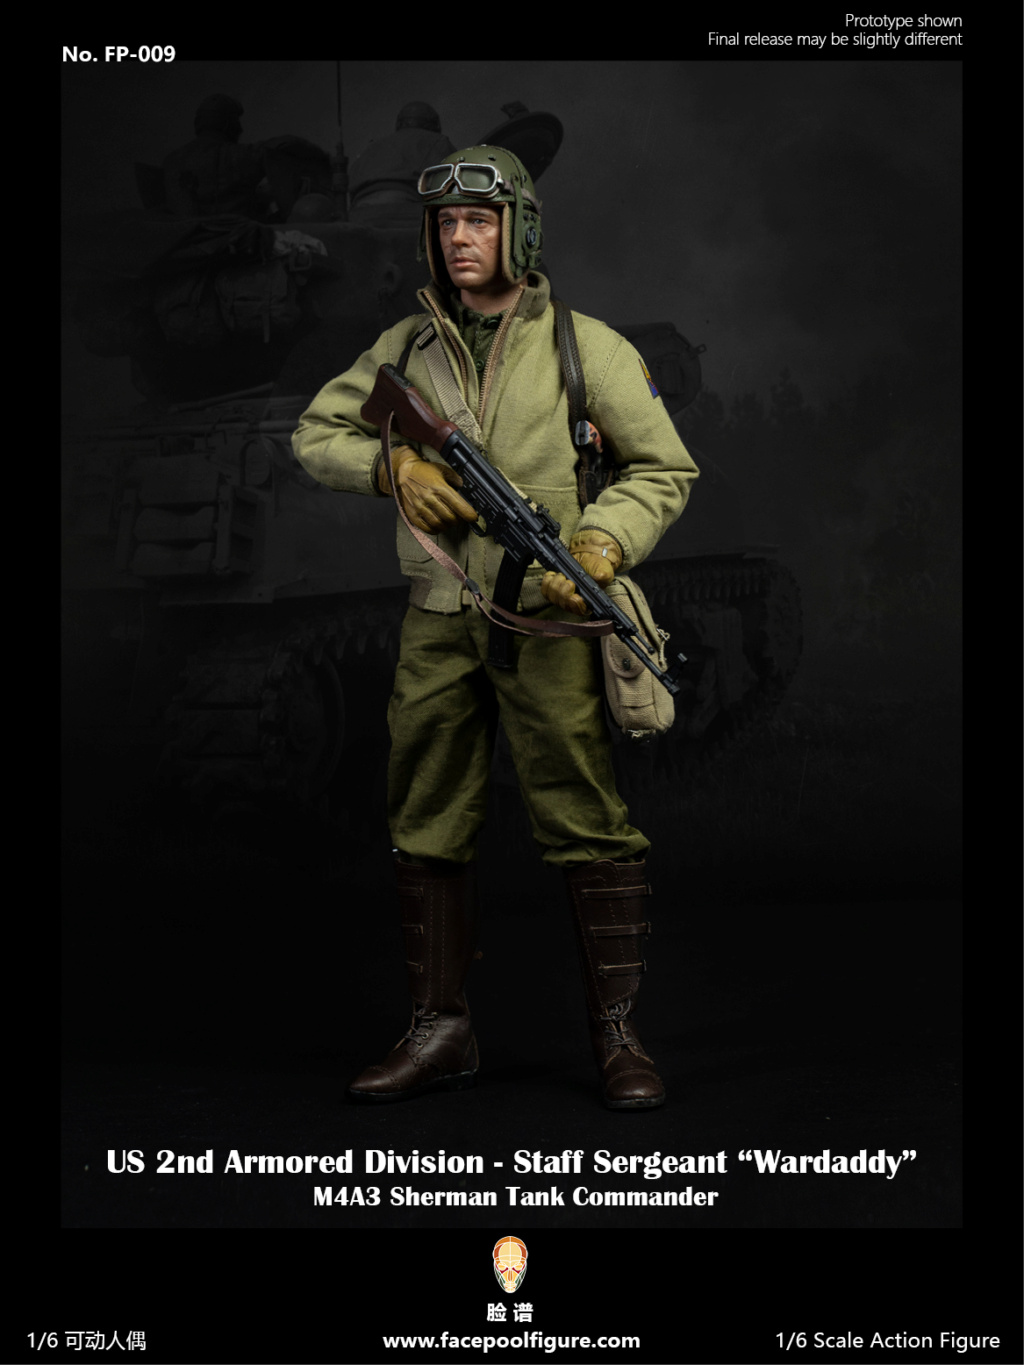 FacepoolFigure - NEW PRODUCT: Facepool Figure: 1/6 2nd Armored Division Staff Sergeant 2nd Panzer Division #Wardaddy) 18385410